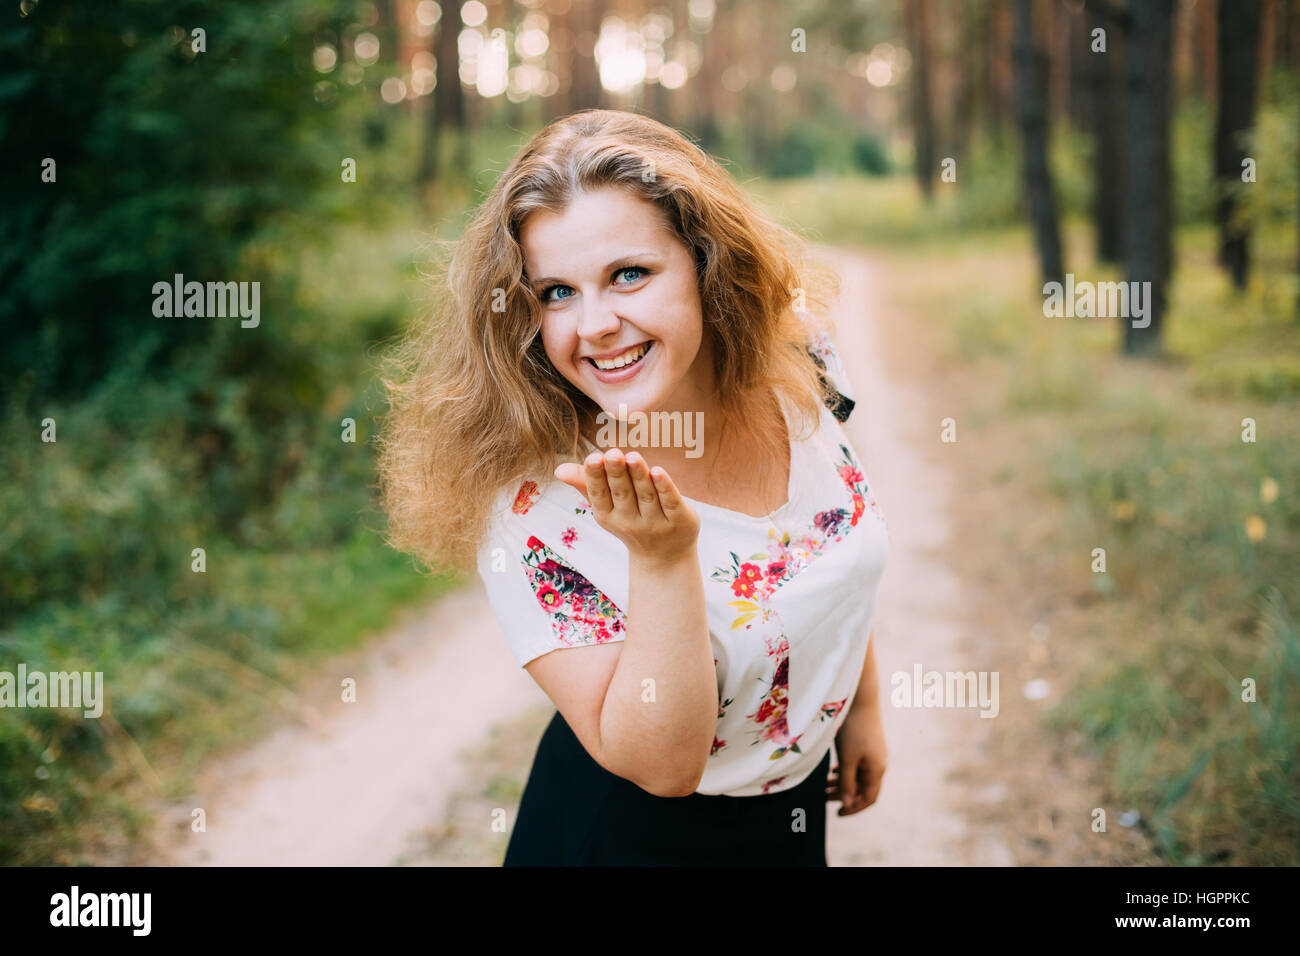 Portrait Of Young Pretty Plus Size Caucasian Happy Smiling Girl Woman With Blue Eyes, Wavy Brown Long Hair In White T-Shirt With Floral Print Sending Stock Photo